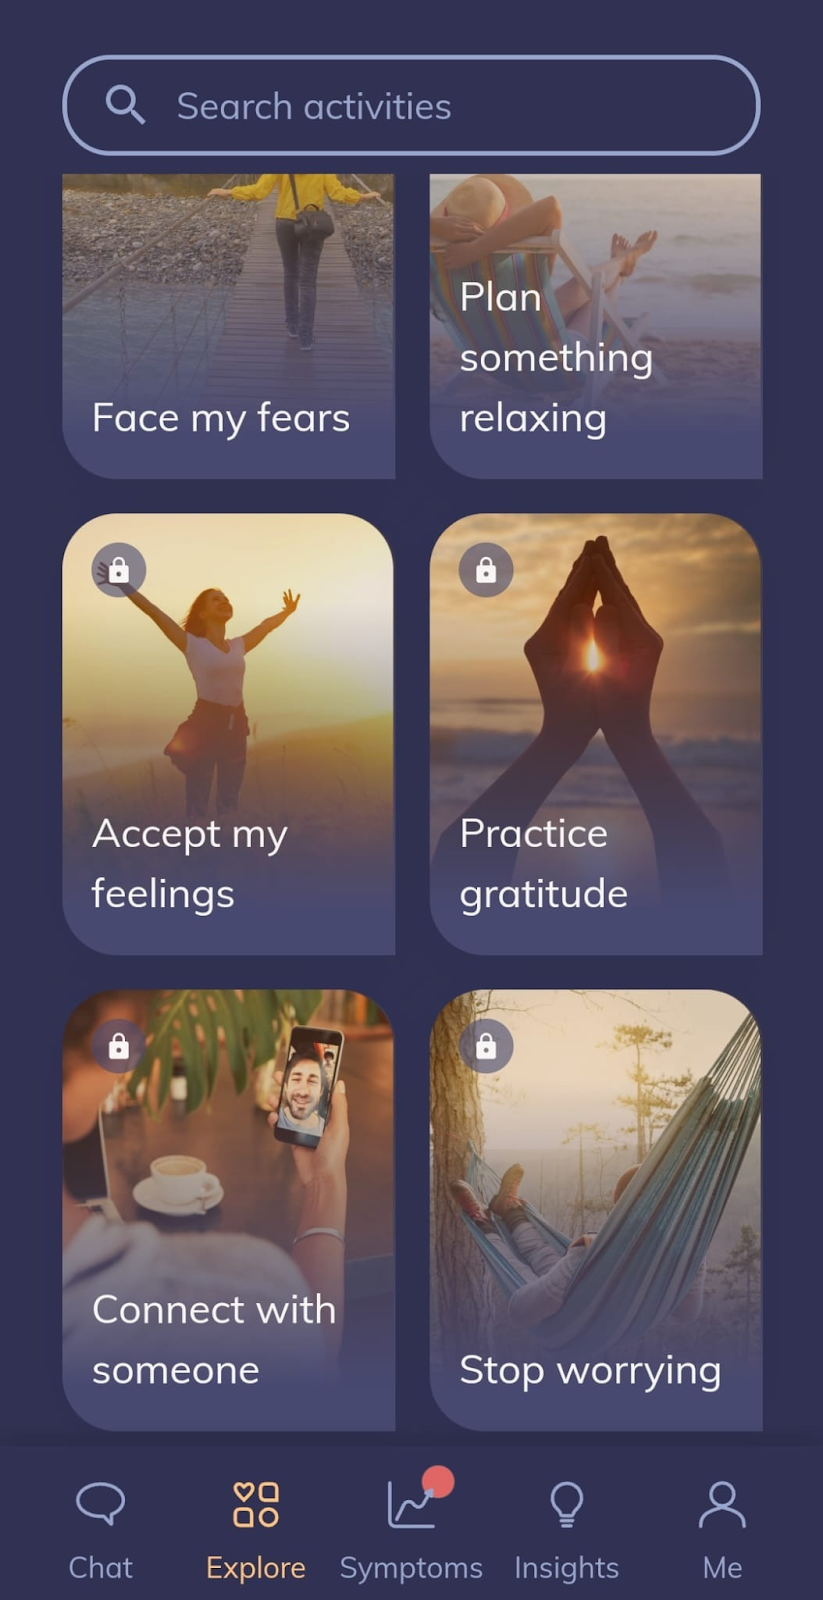 The 'explore' section which displays numerous activities, such as: accept my feelings, practice gratitude, and connect with someone. 